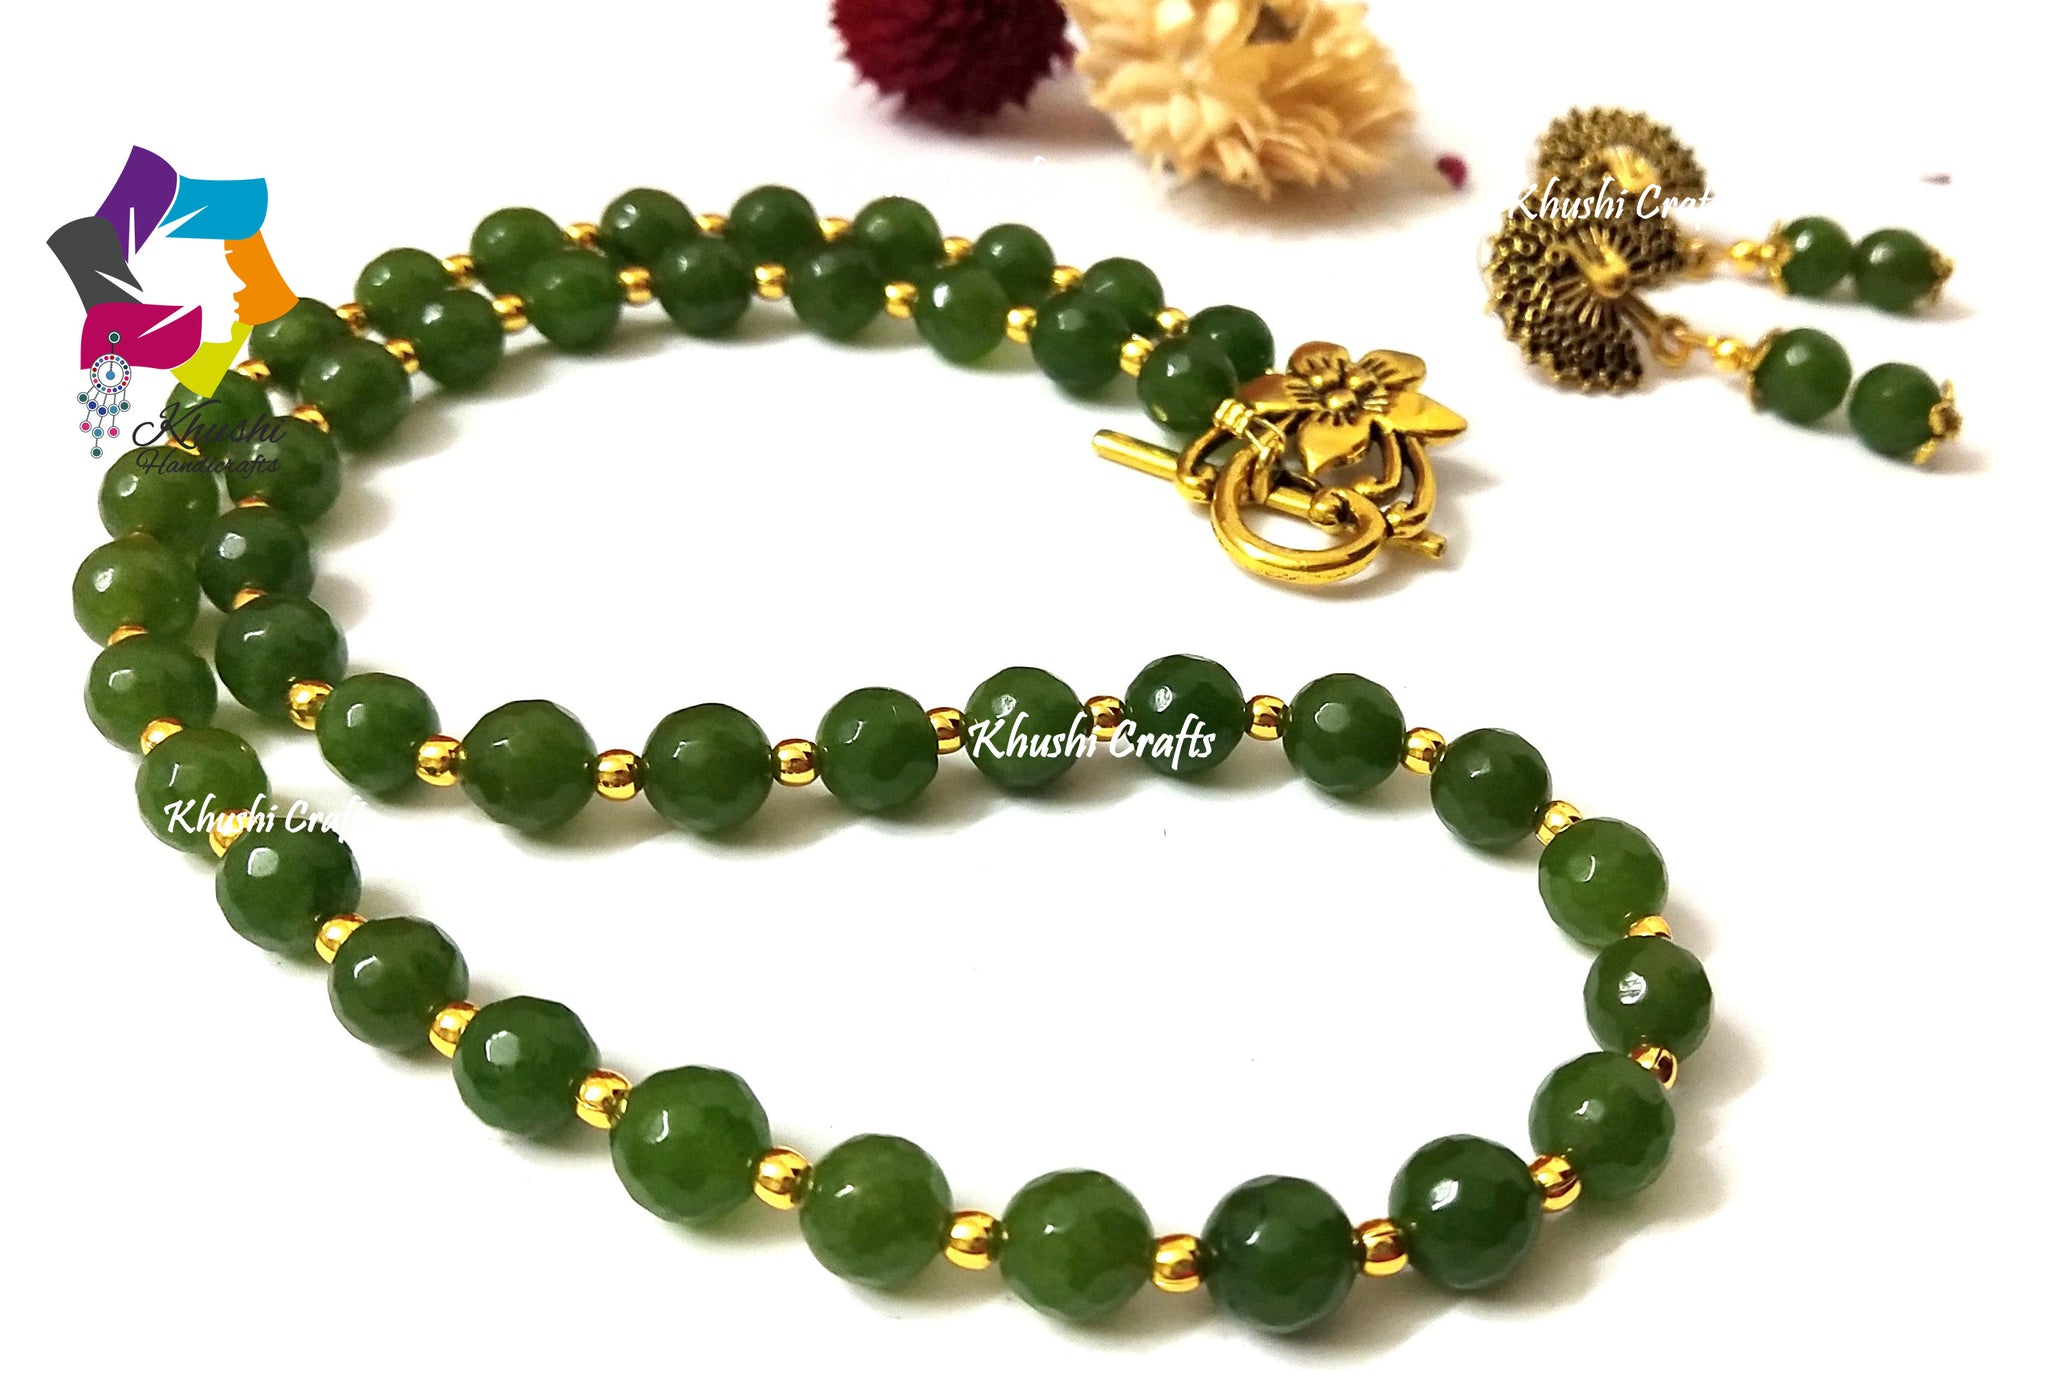 Green agate handmade necklace